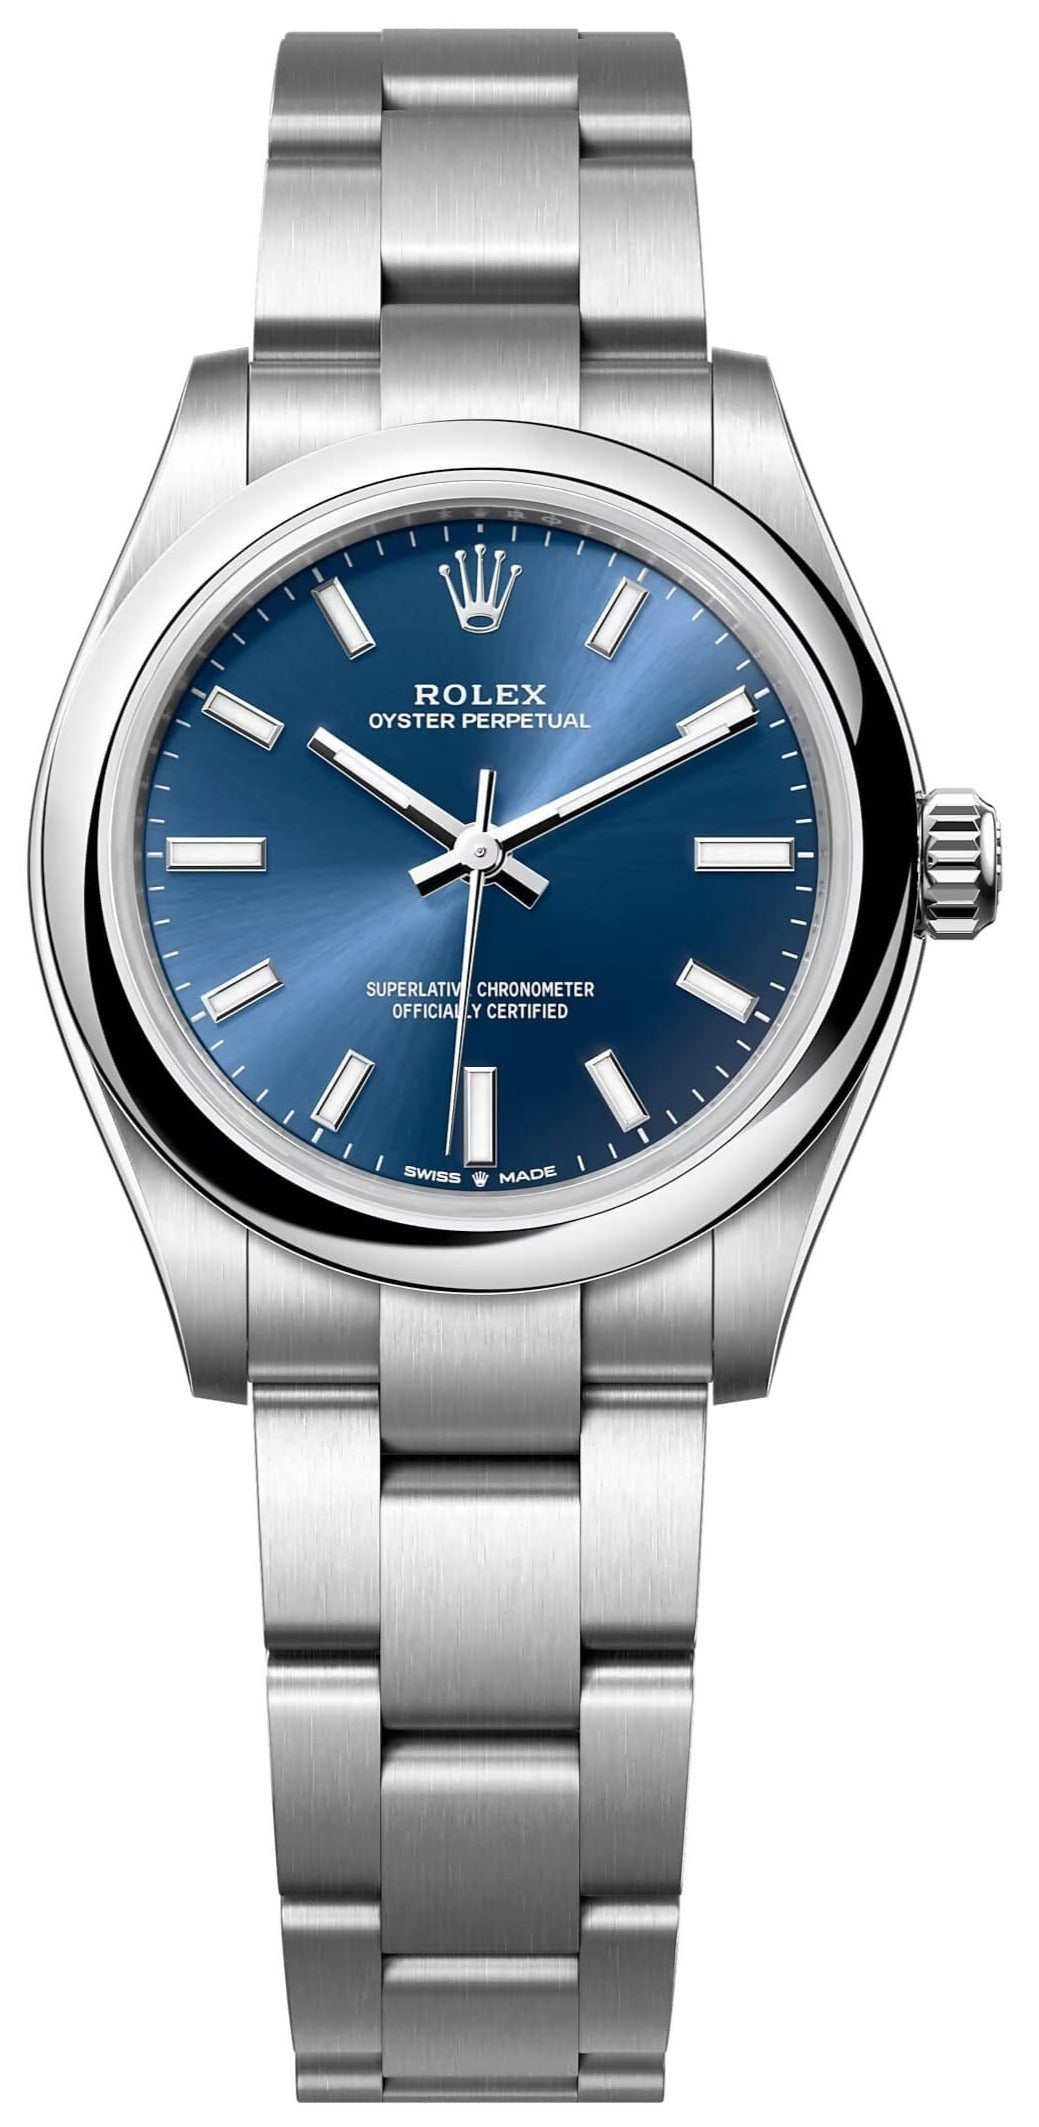 Rolex Oyster perpetual 31, Oyster, 31 mm, Oystersteel, Bright blue dial, Oyster bracelet, ref 277200